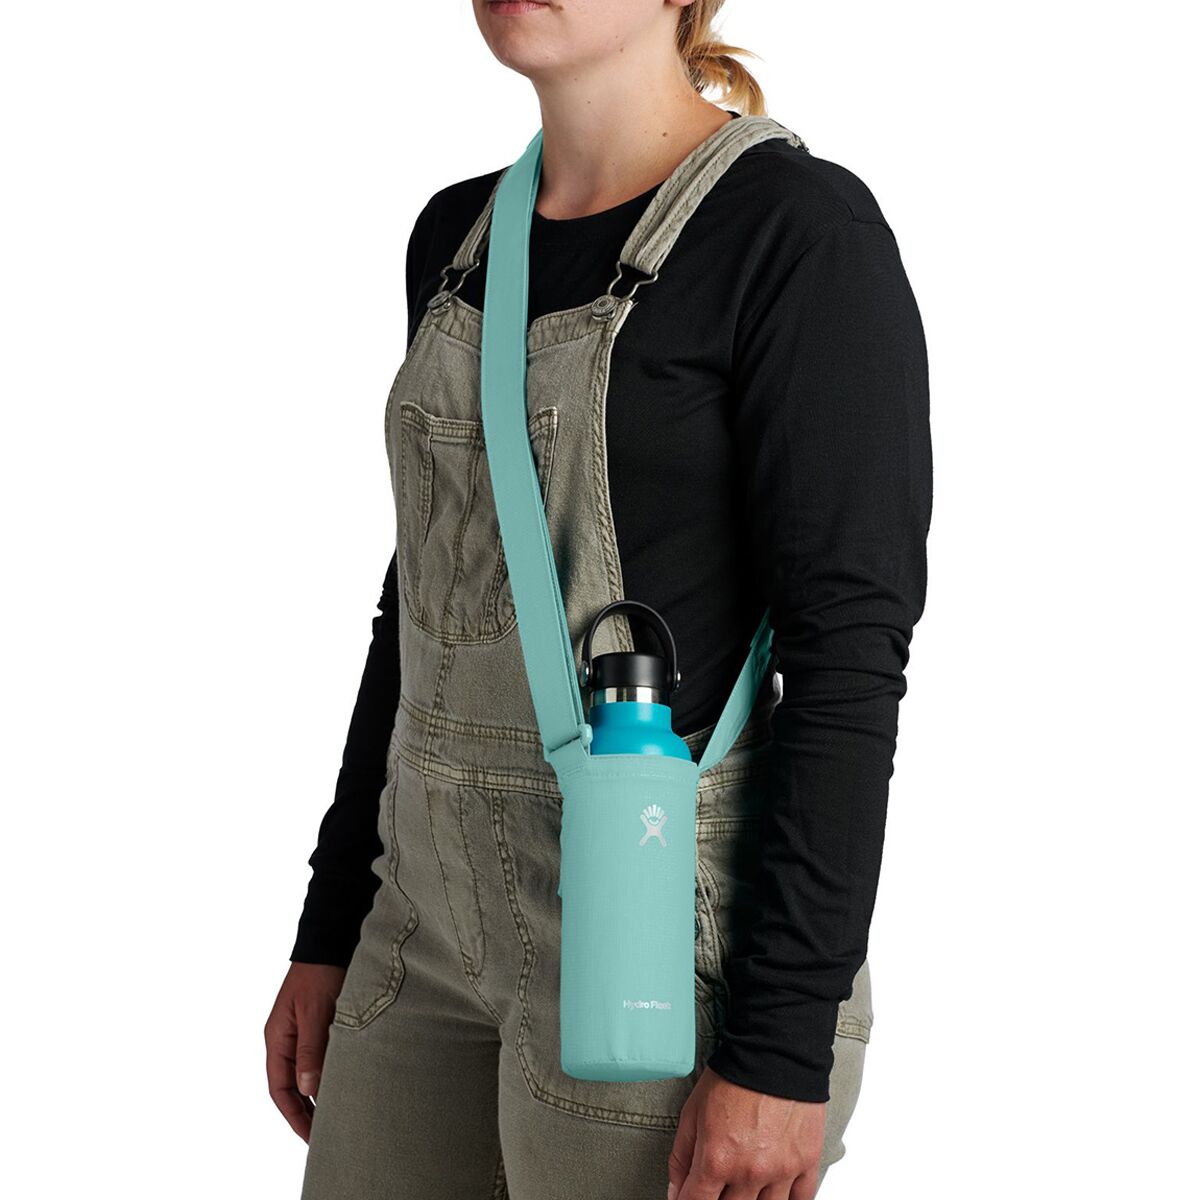 Hydro Flask Packable Bottle Sling with Pouch - Small, Lava